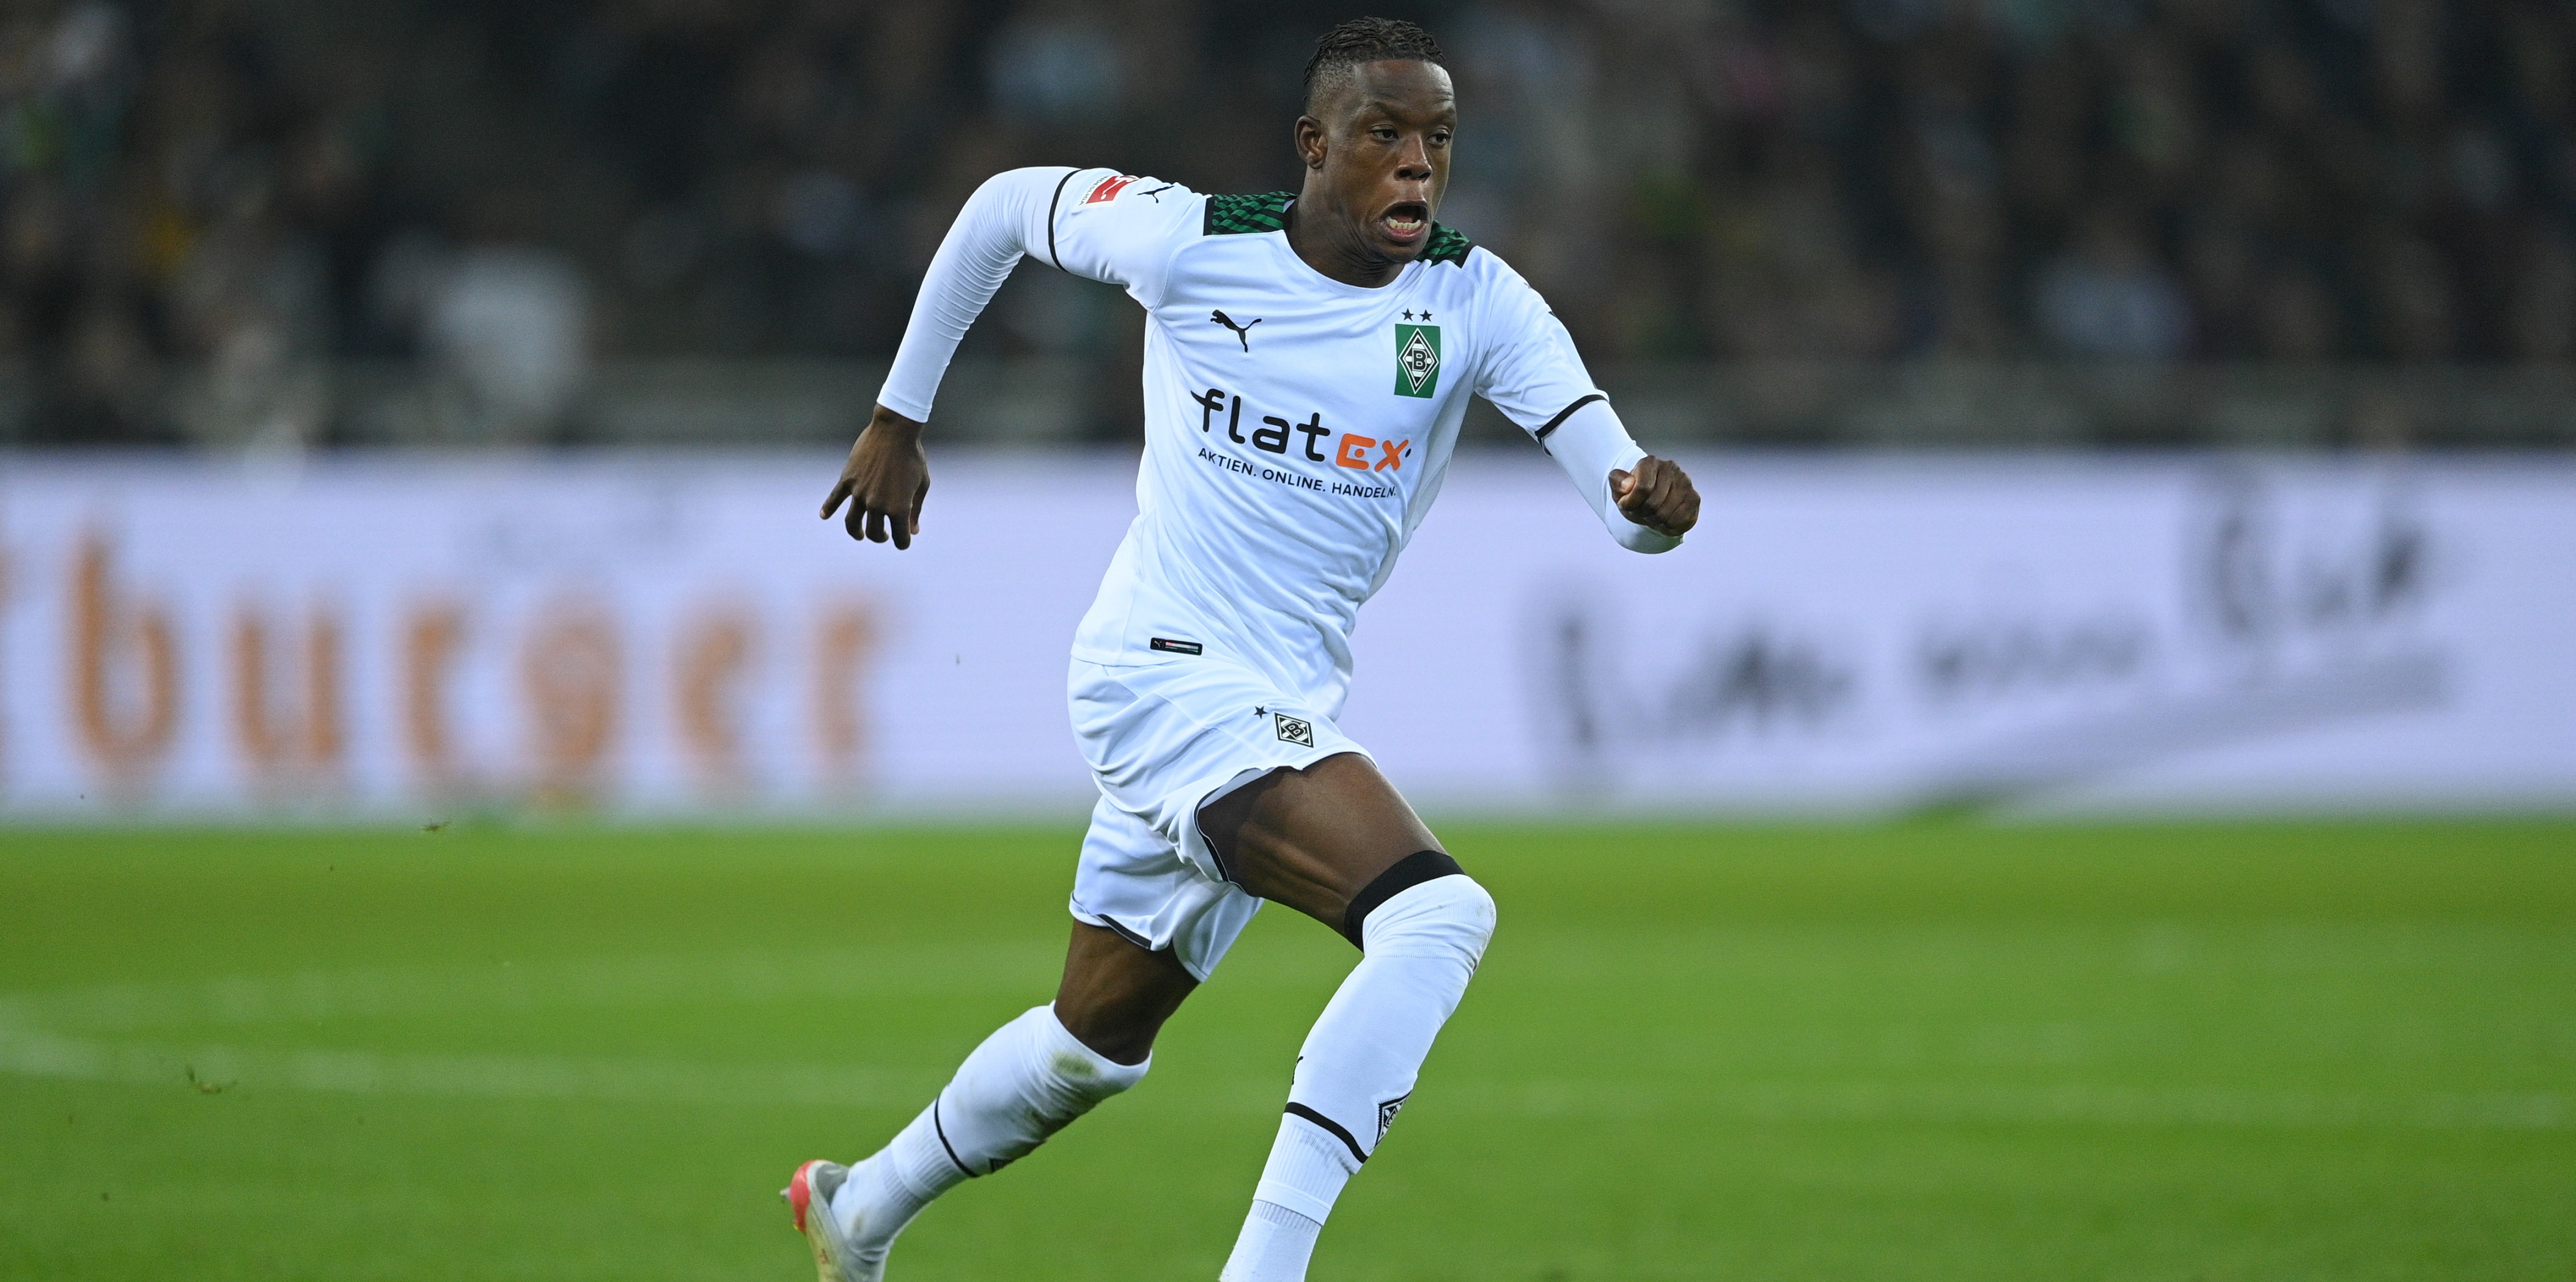 Liverpool’s interest in Denis Zakaria confirmed with two PL outfits also keeping tabs – Angelo Mangiante